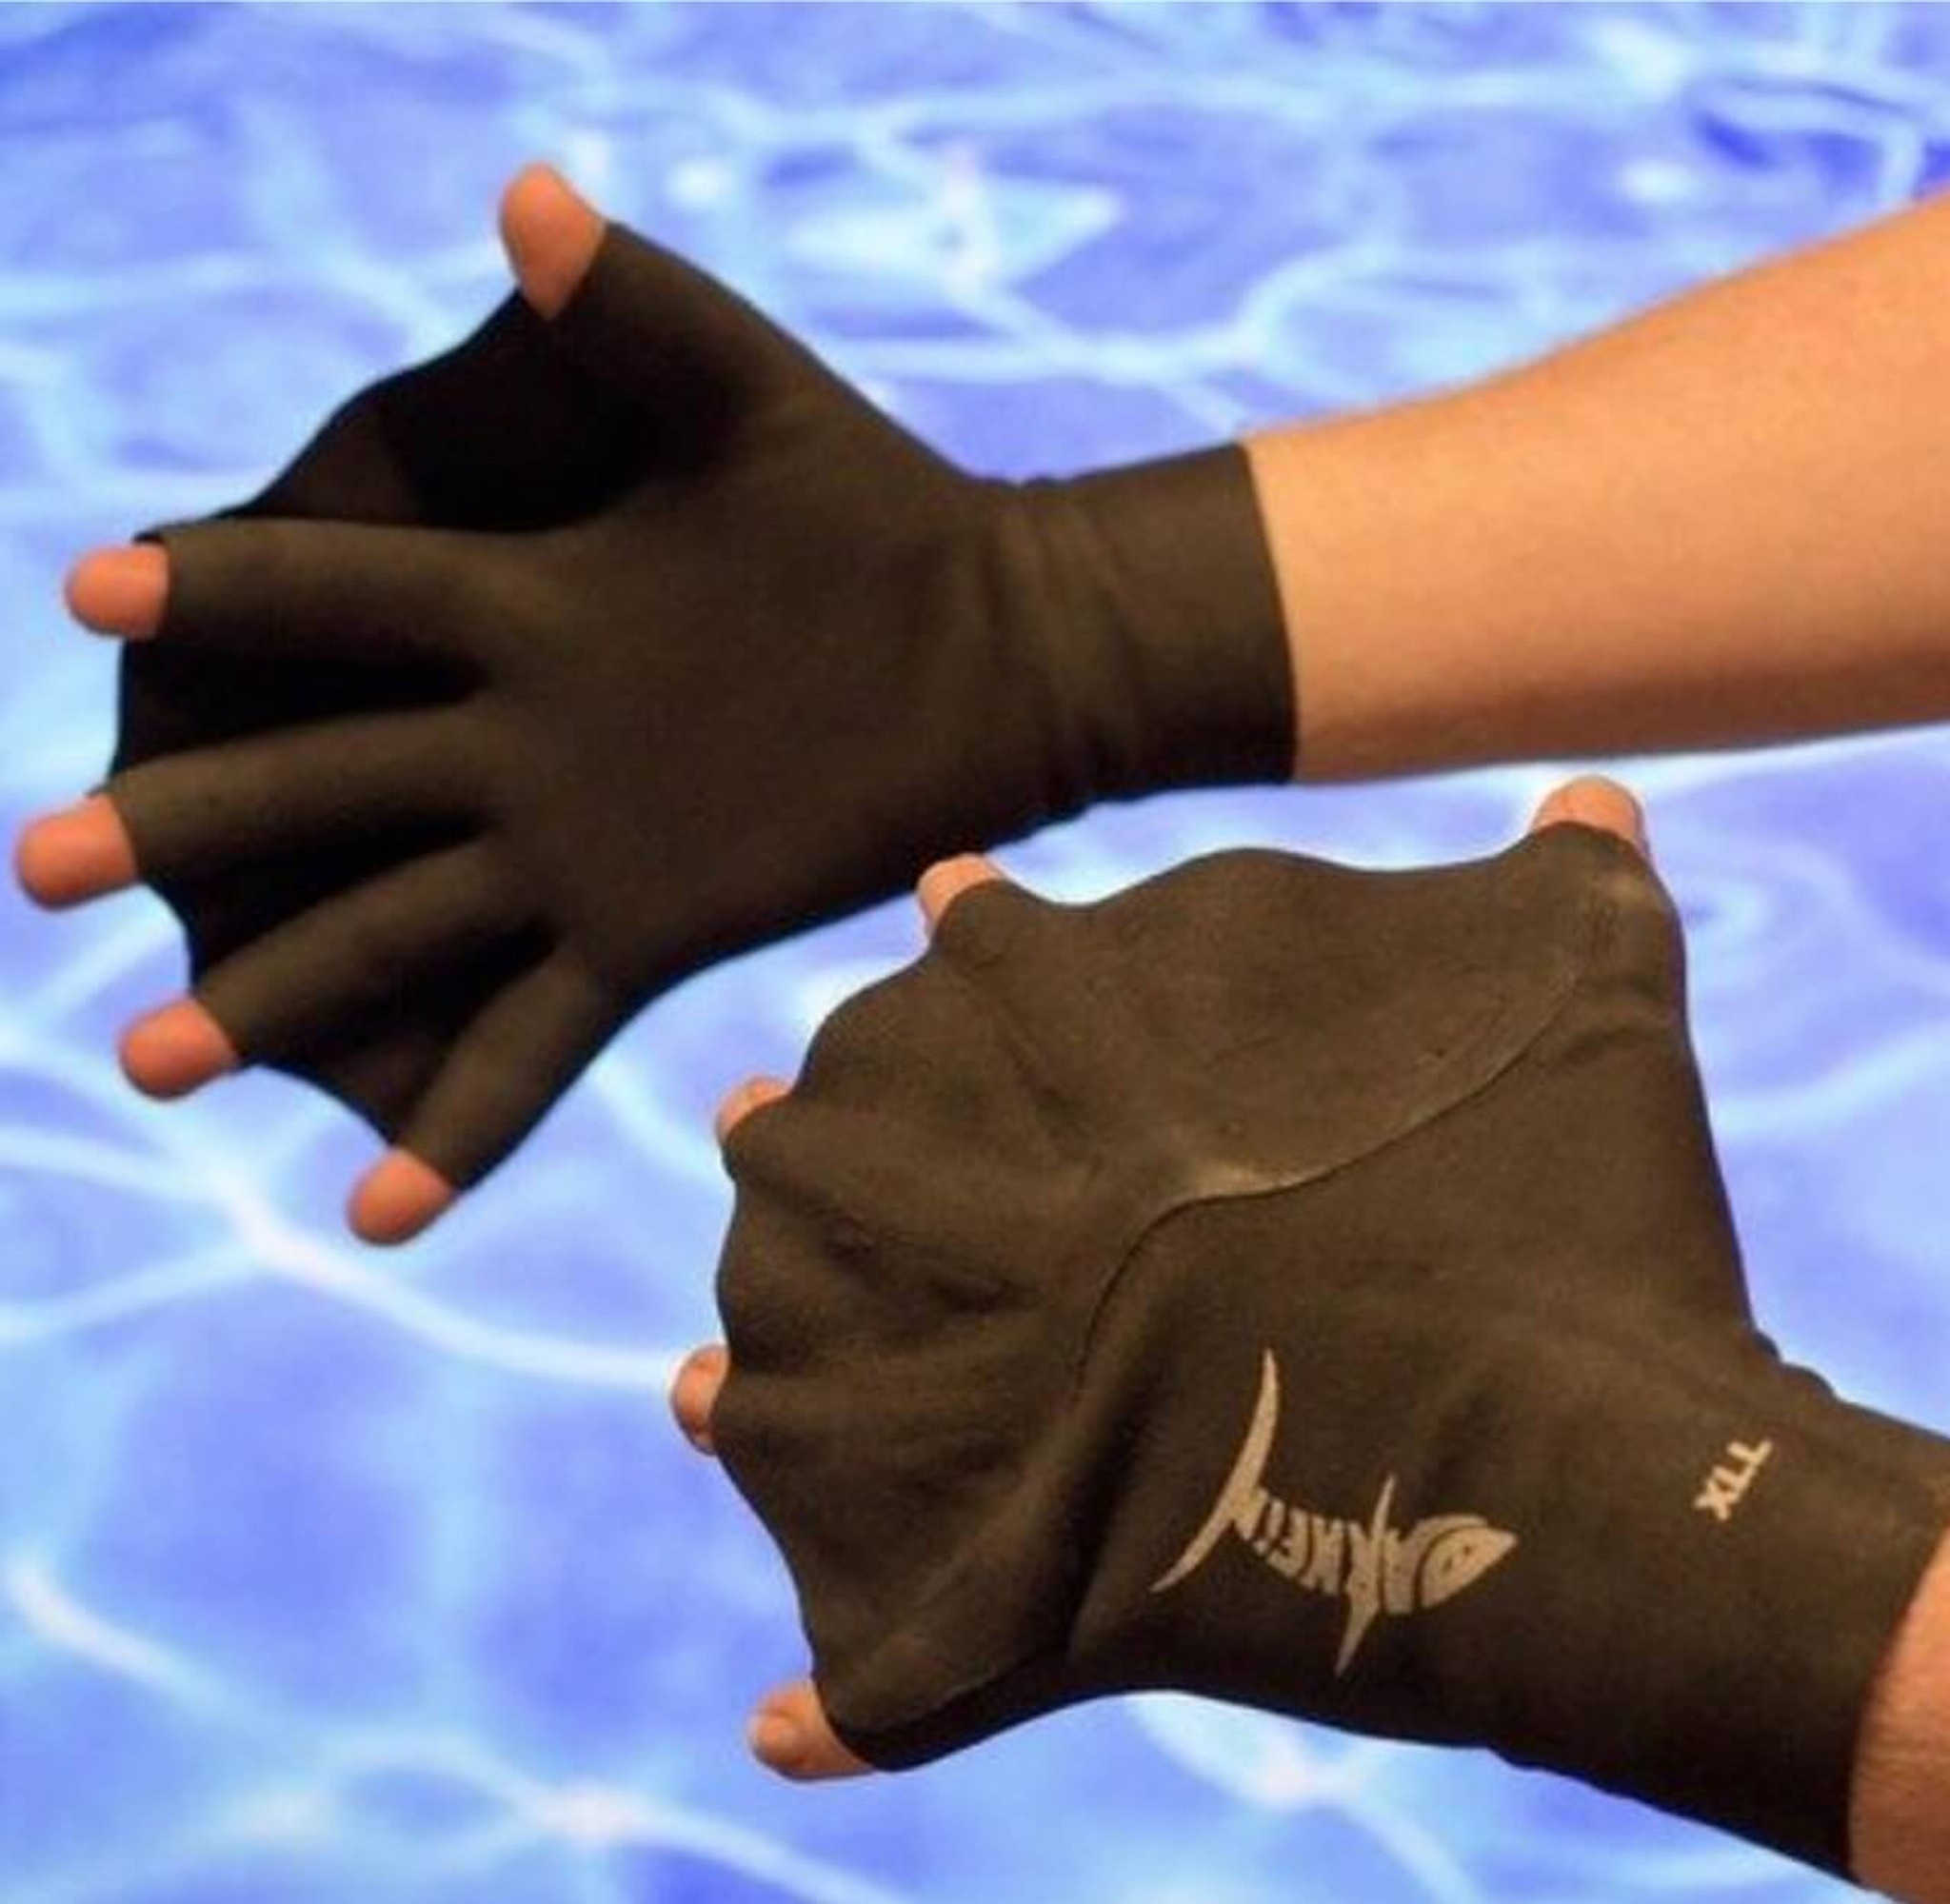 Darkfin  Webbed Paddle Gloves for Surfing, Diving, Snorkeling, Swimming